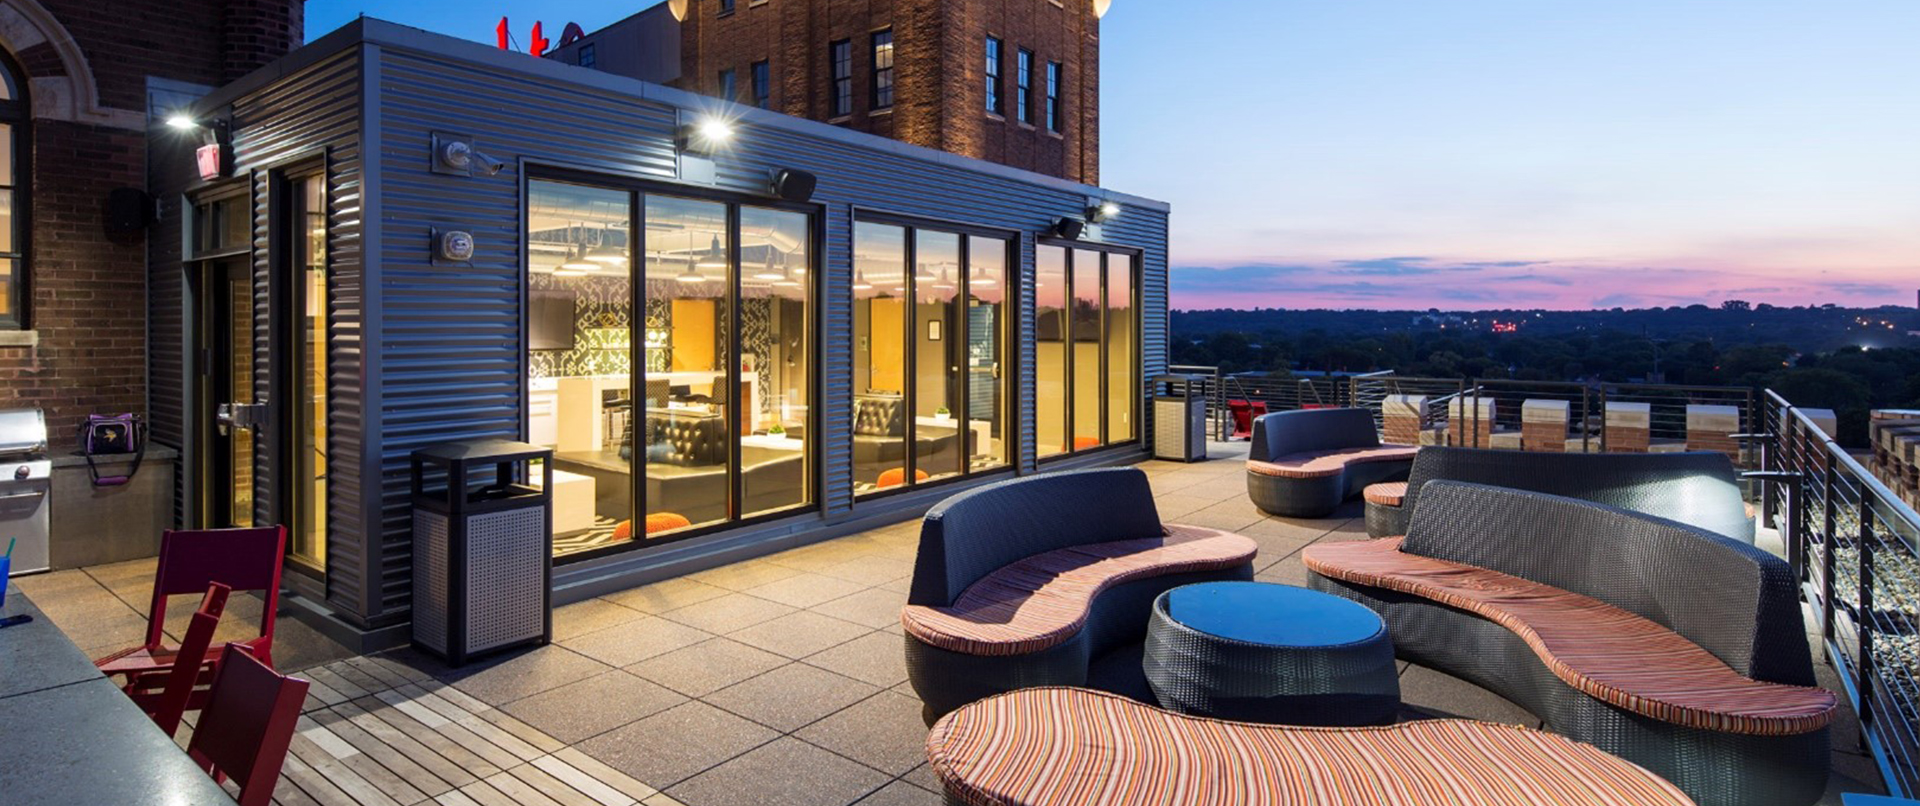 Rooftop Lounge Area with Sunset